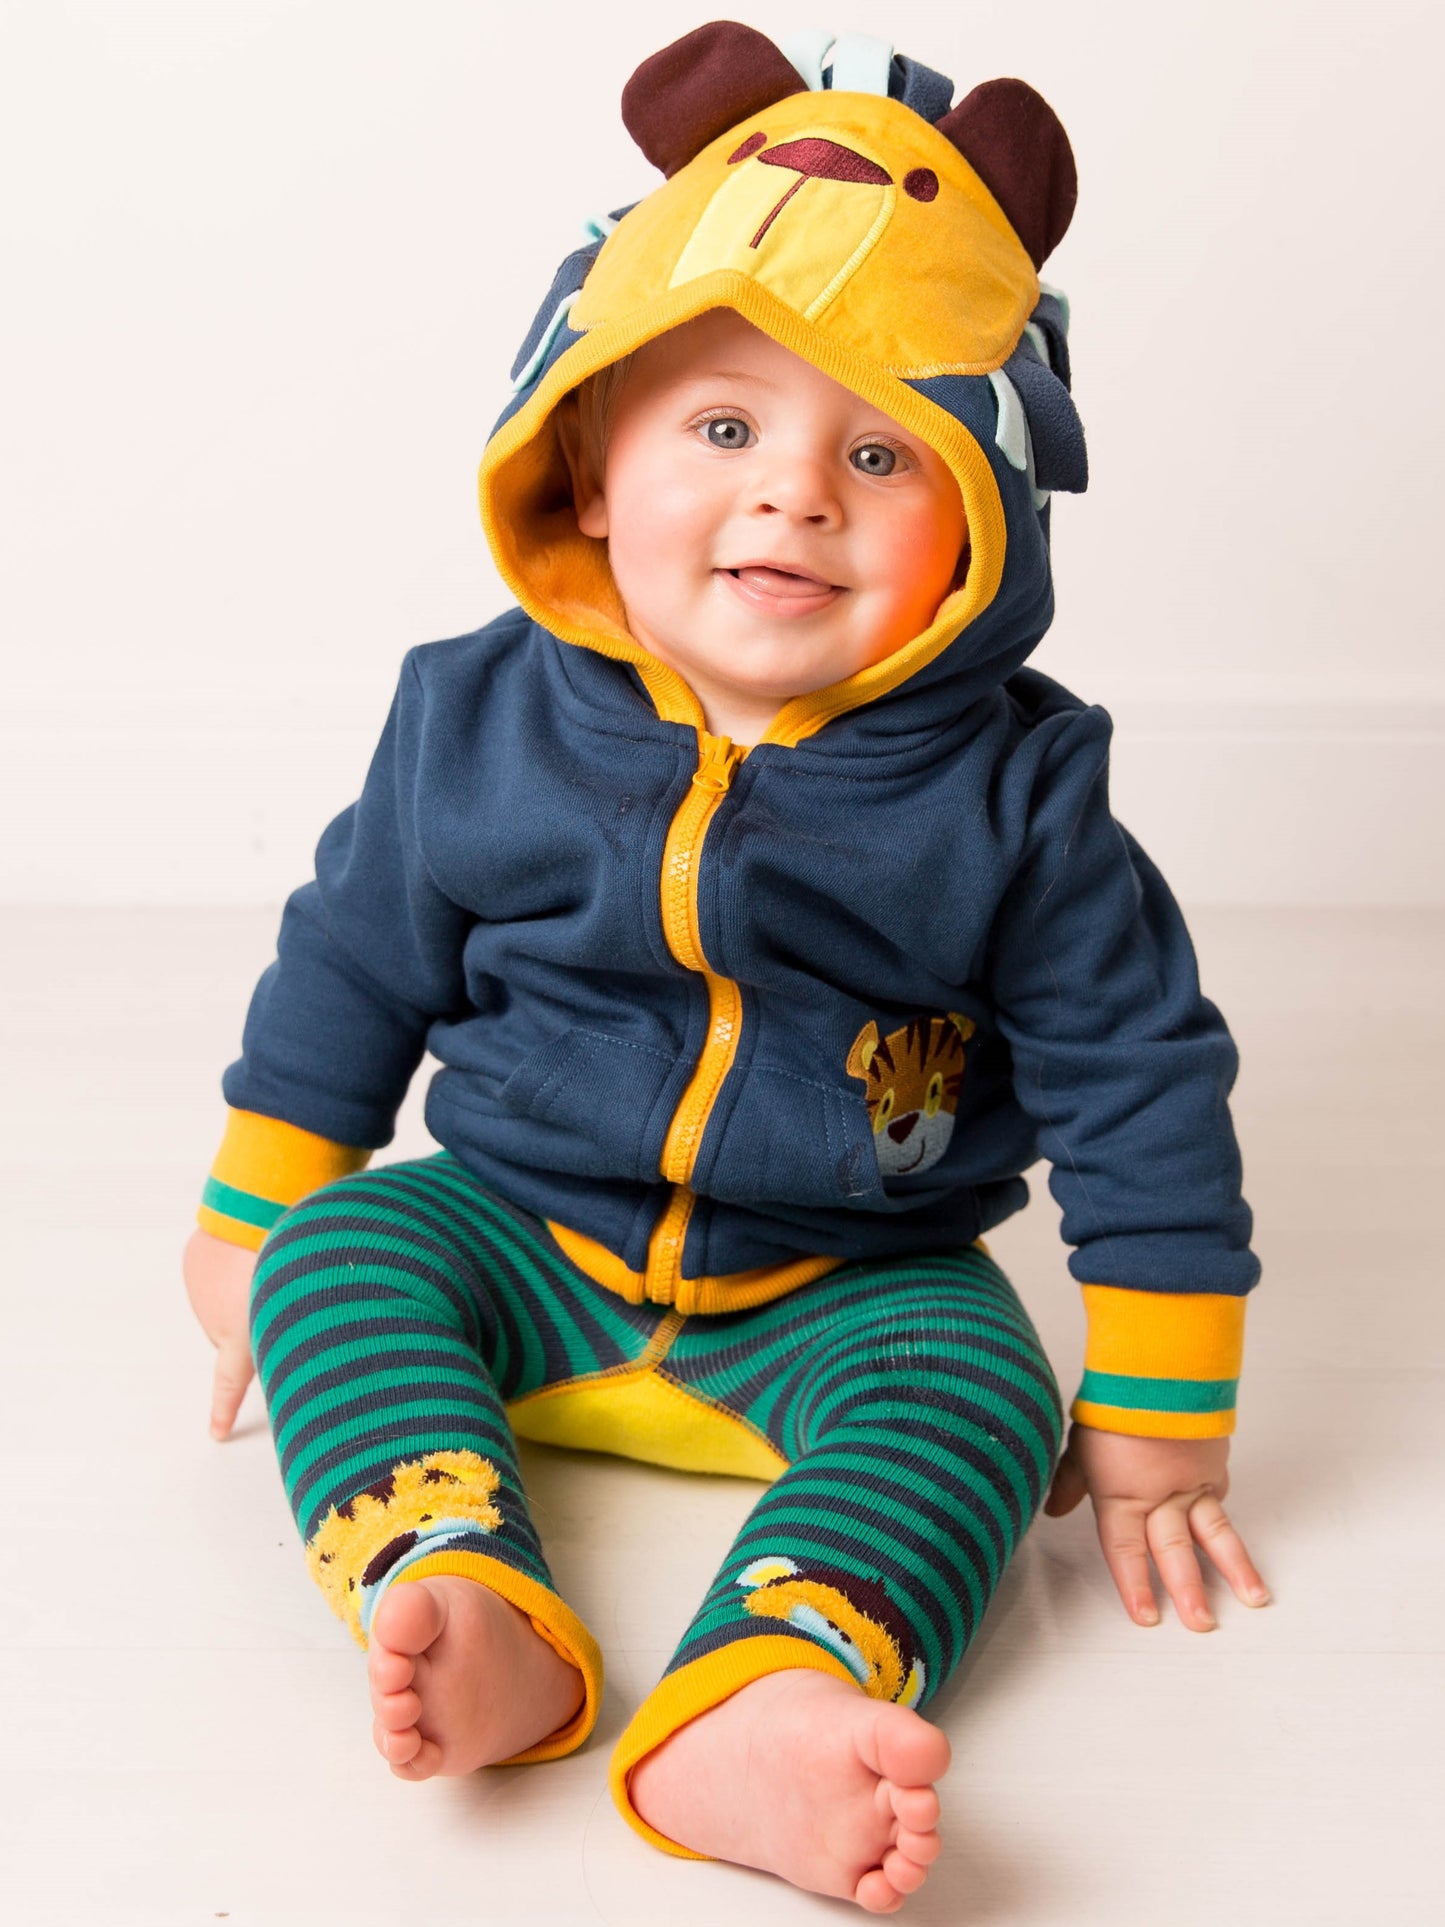 frankie the lion hoodie from blade & rose at whippersnappersonline